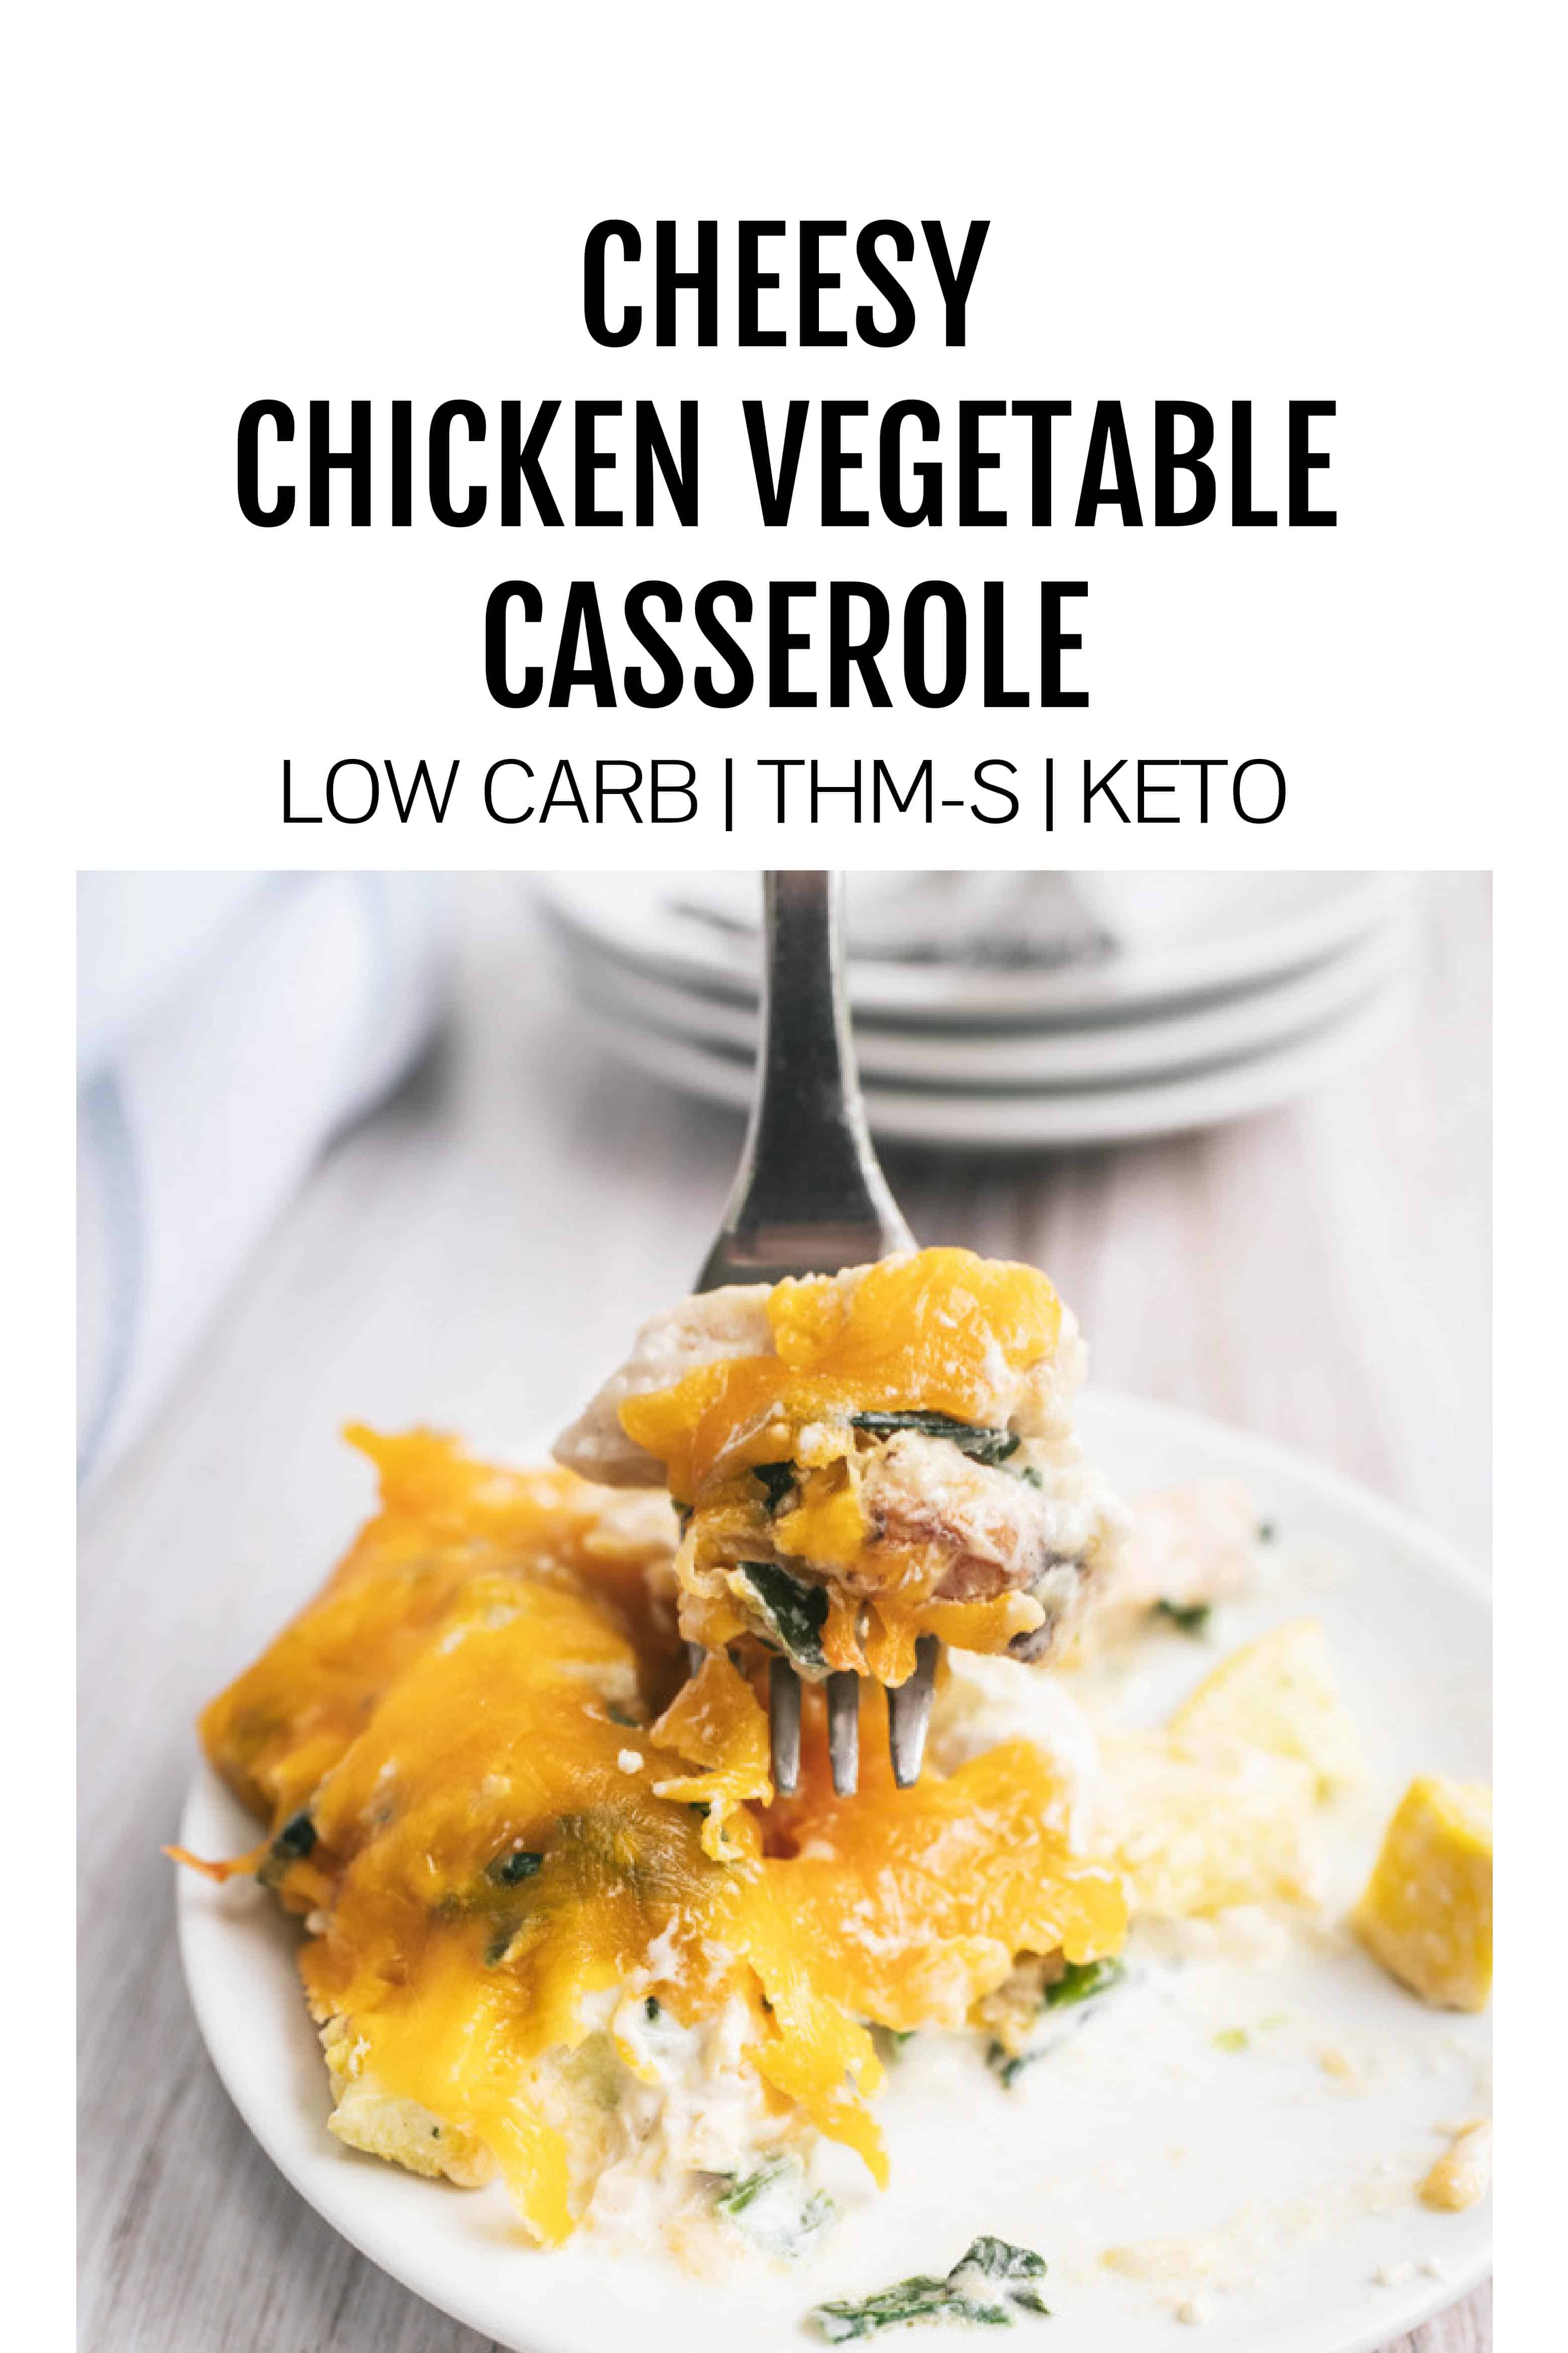 An easy low carb chicken casserole that makes healthy dinners a breeze! Filled with fresh vegetables and plenty of flavor, this easy cheesy chicken casserole will be a family favorite! #lowcarbchickencasserole #easyhealthydinner